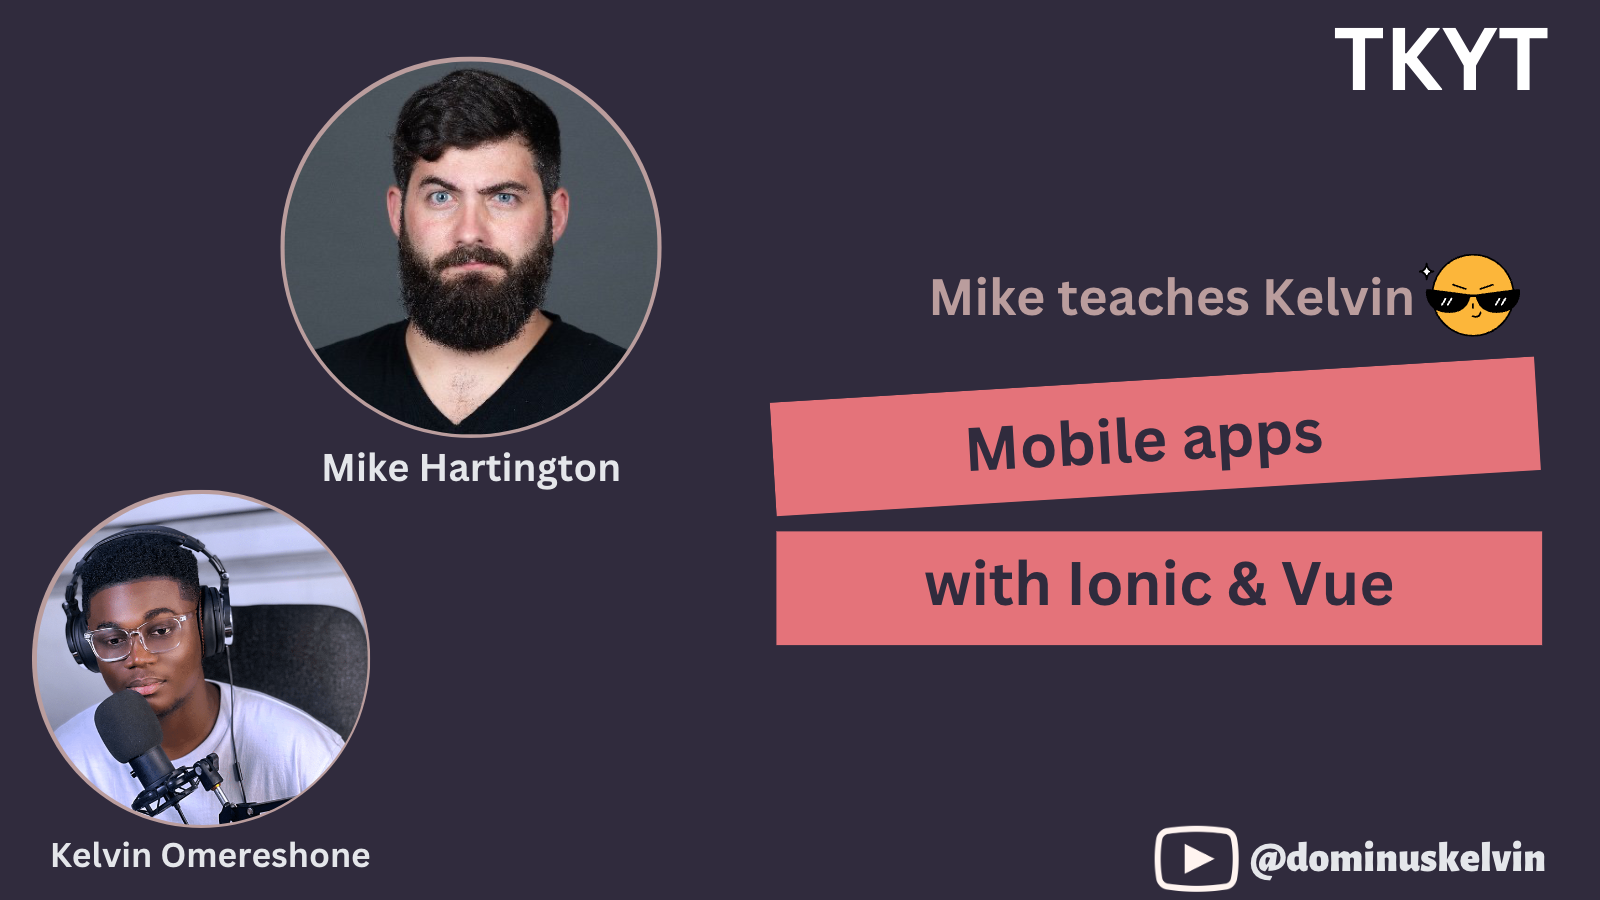 Building mobile apps with Ionic & Vue